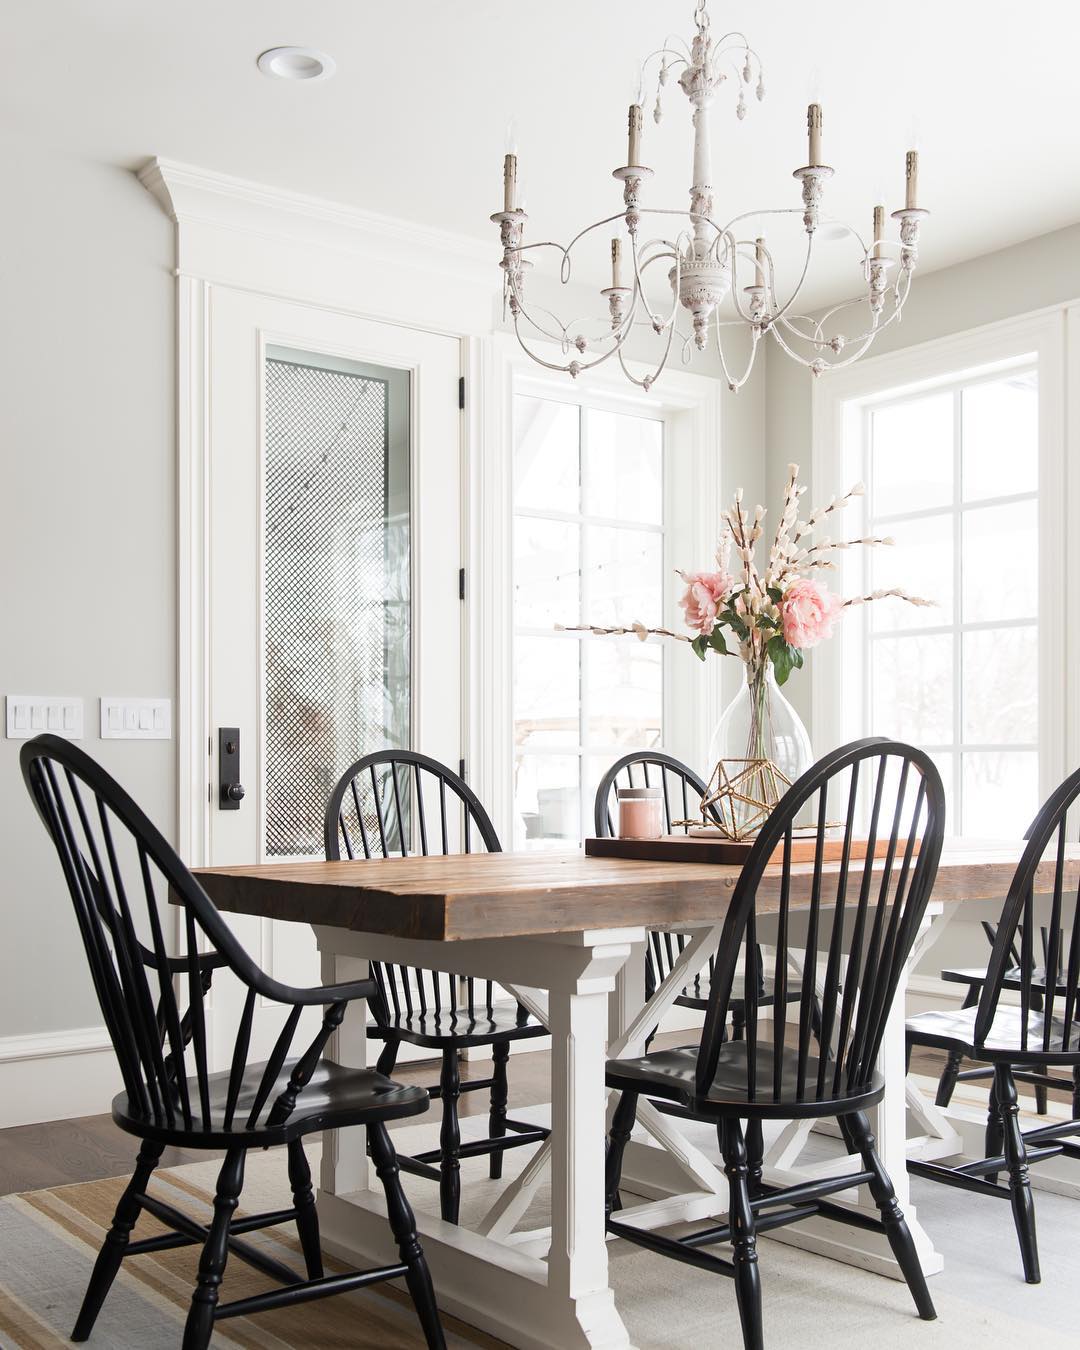 Spindle Back Chairs - @rebekahwestoverinteriors